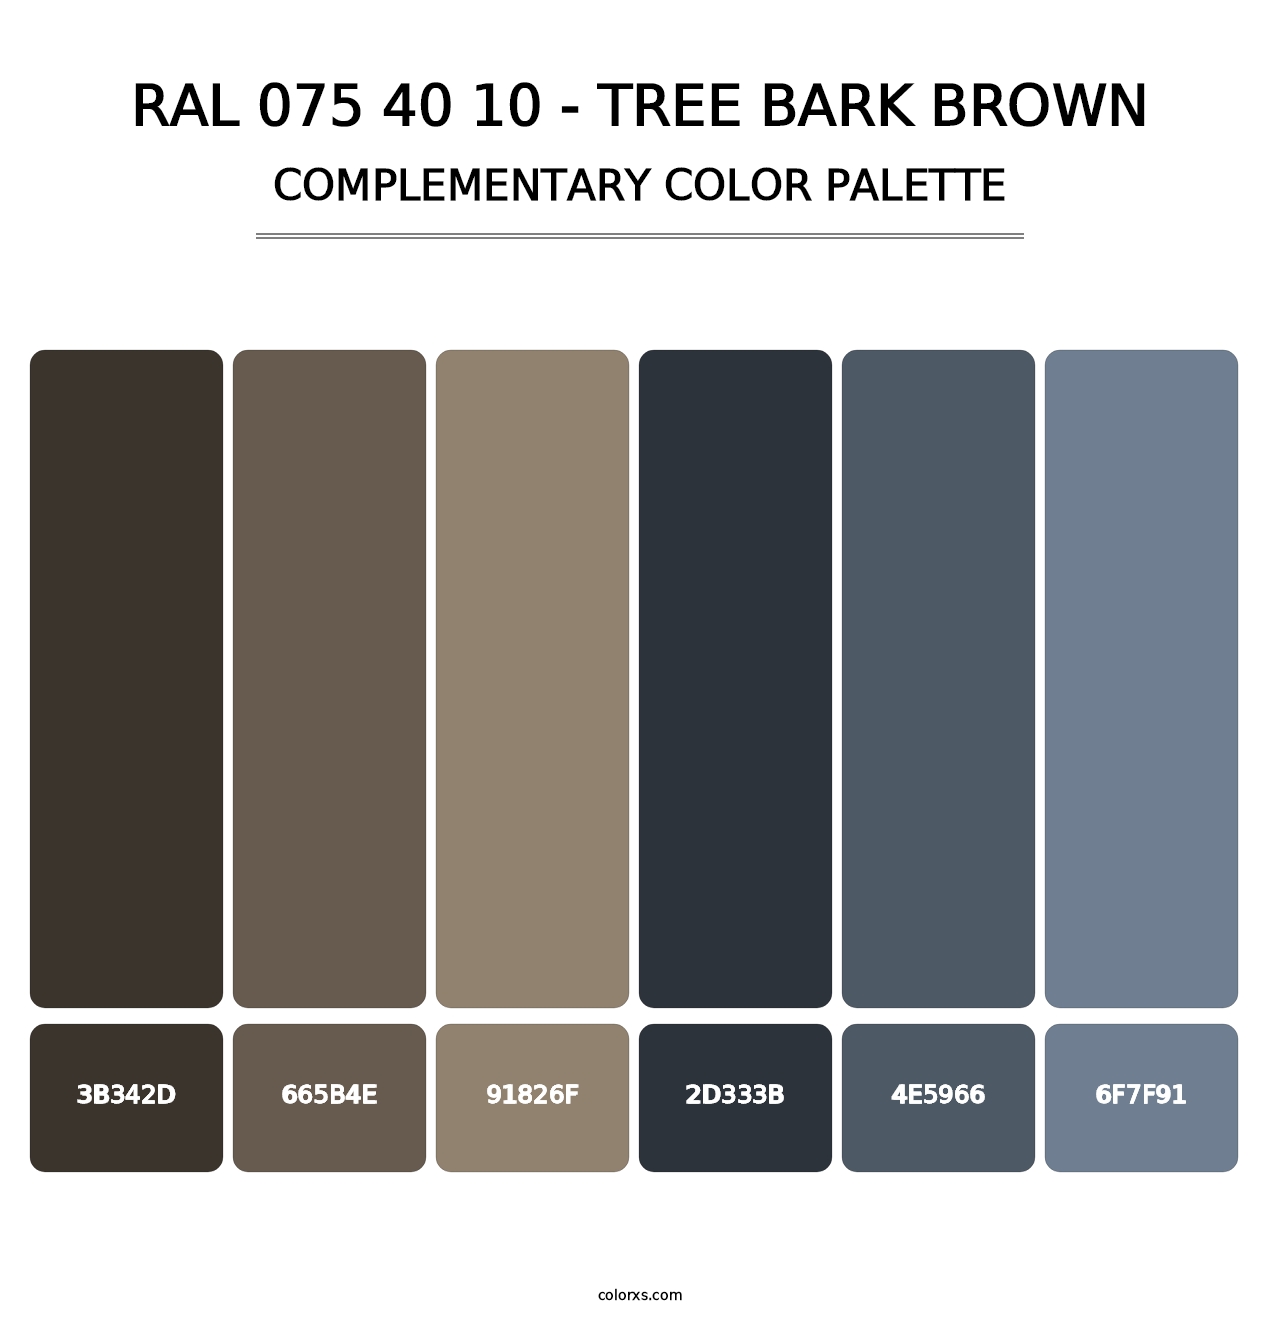 RAL 075 40 10 - Tree Bark Brown - Complementary Color Palette